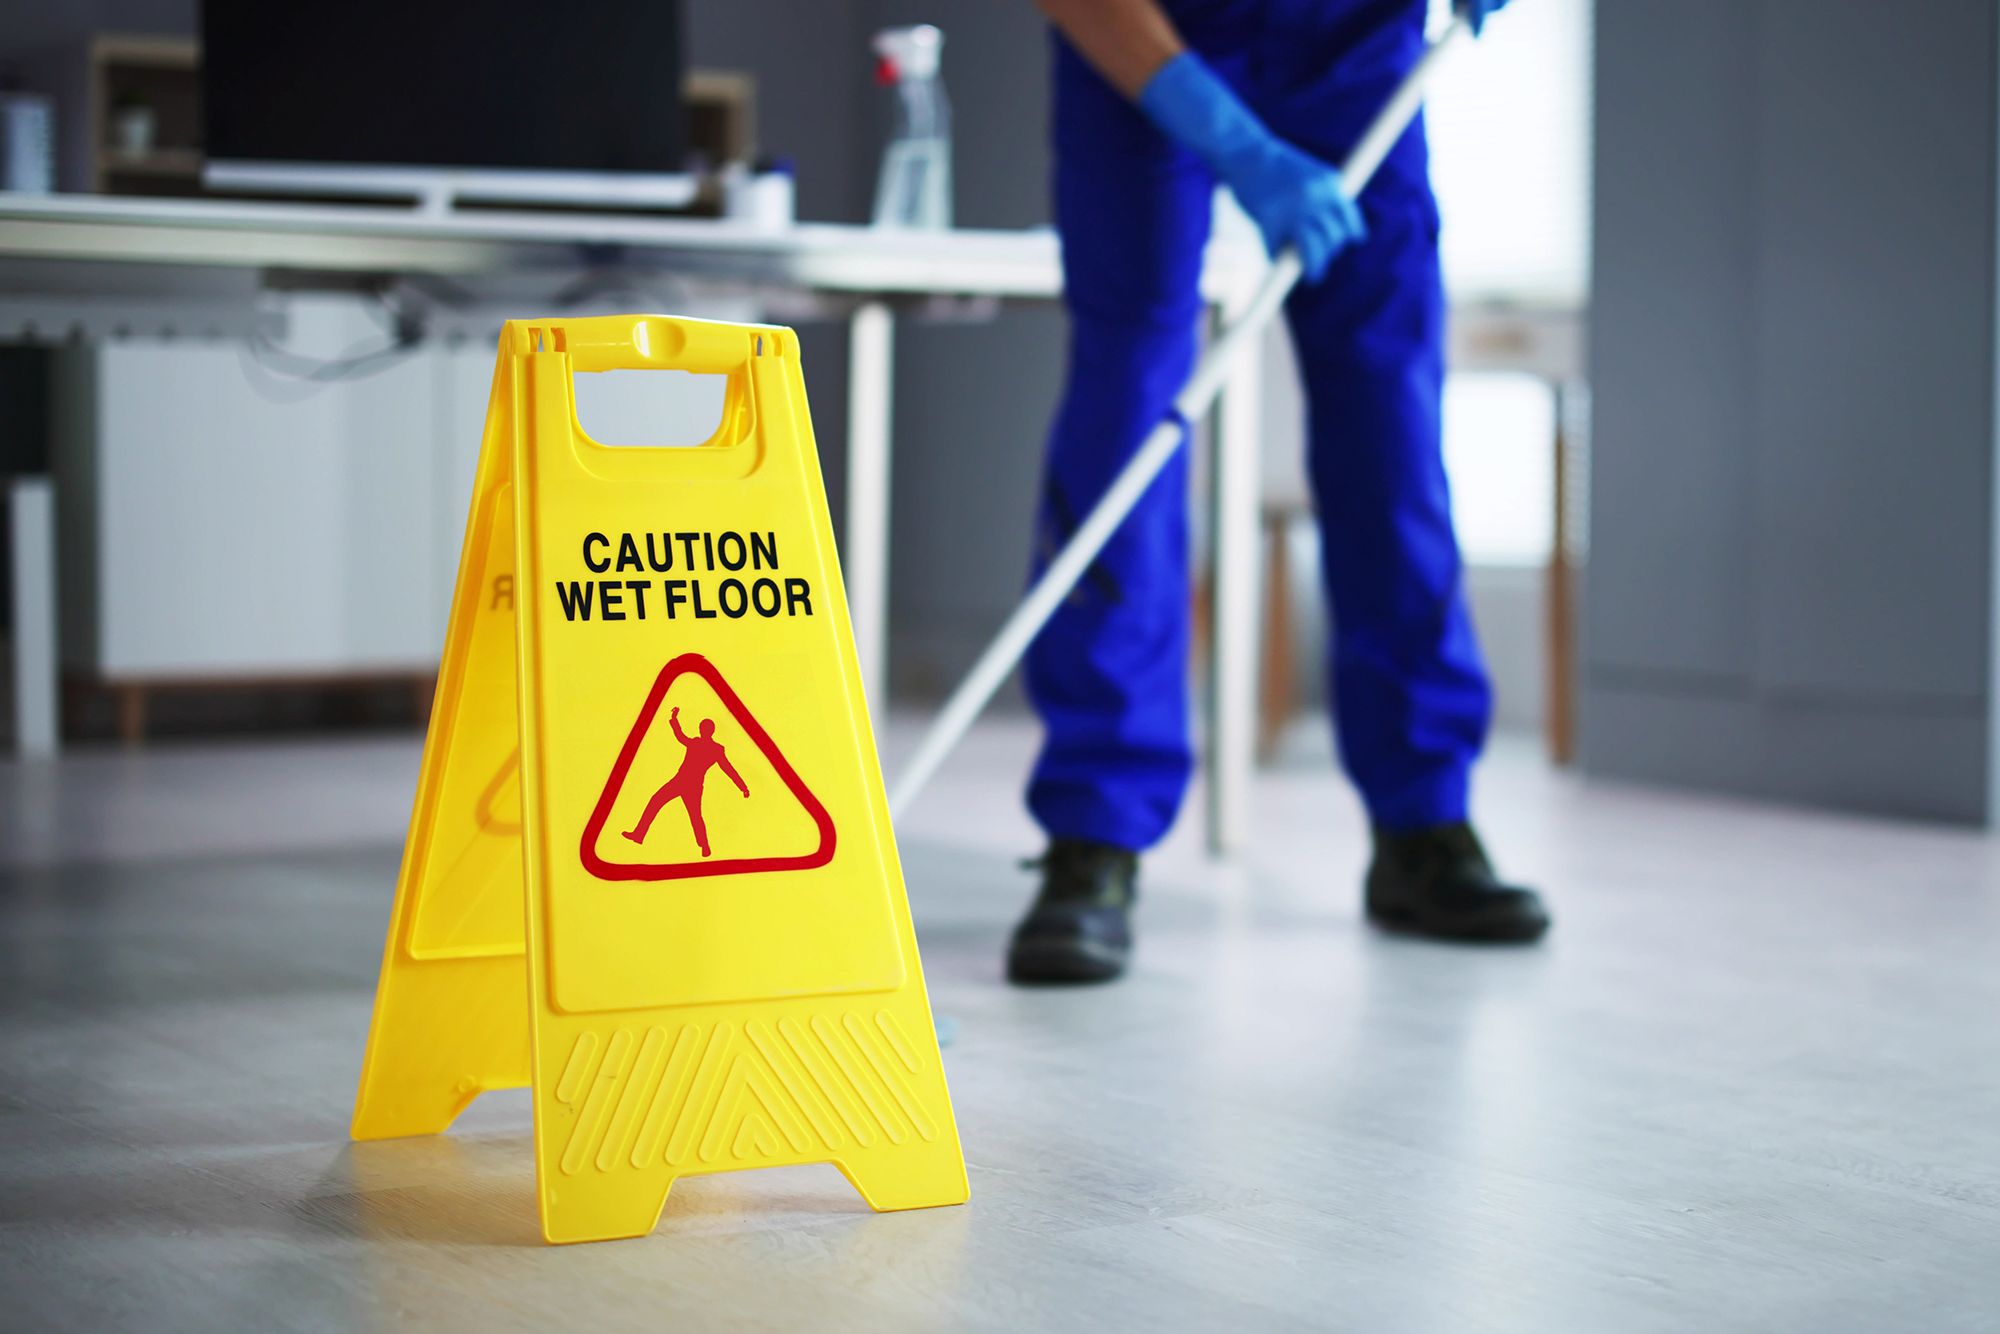 5 Tips for Preventing Slips, Trips, and Falls on School Premises: A janitor cleaning up a classroom with a mop. There is a Caution Wet Floor sign in the foreground.